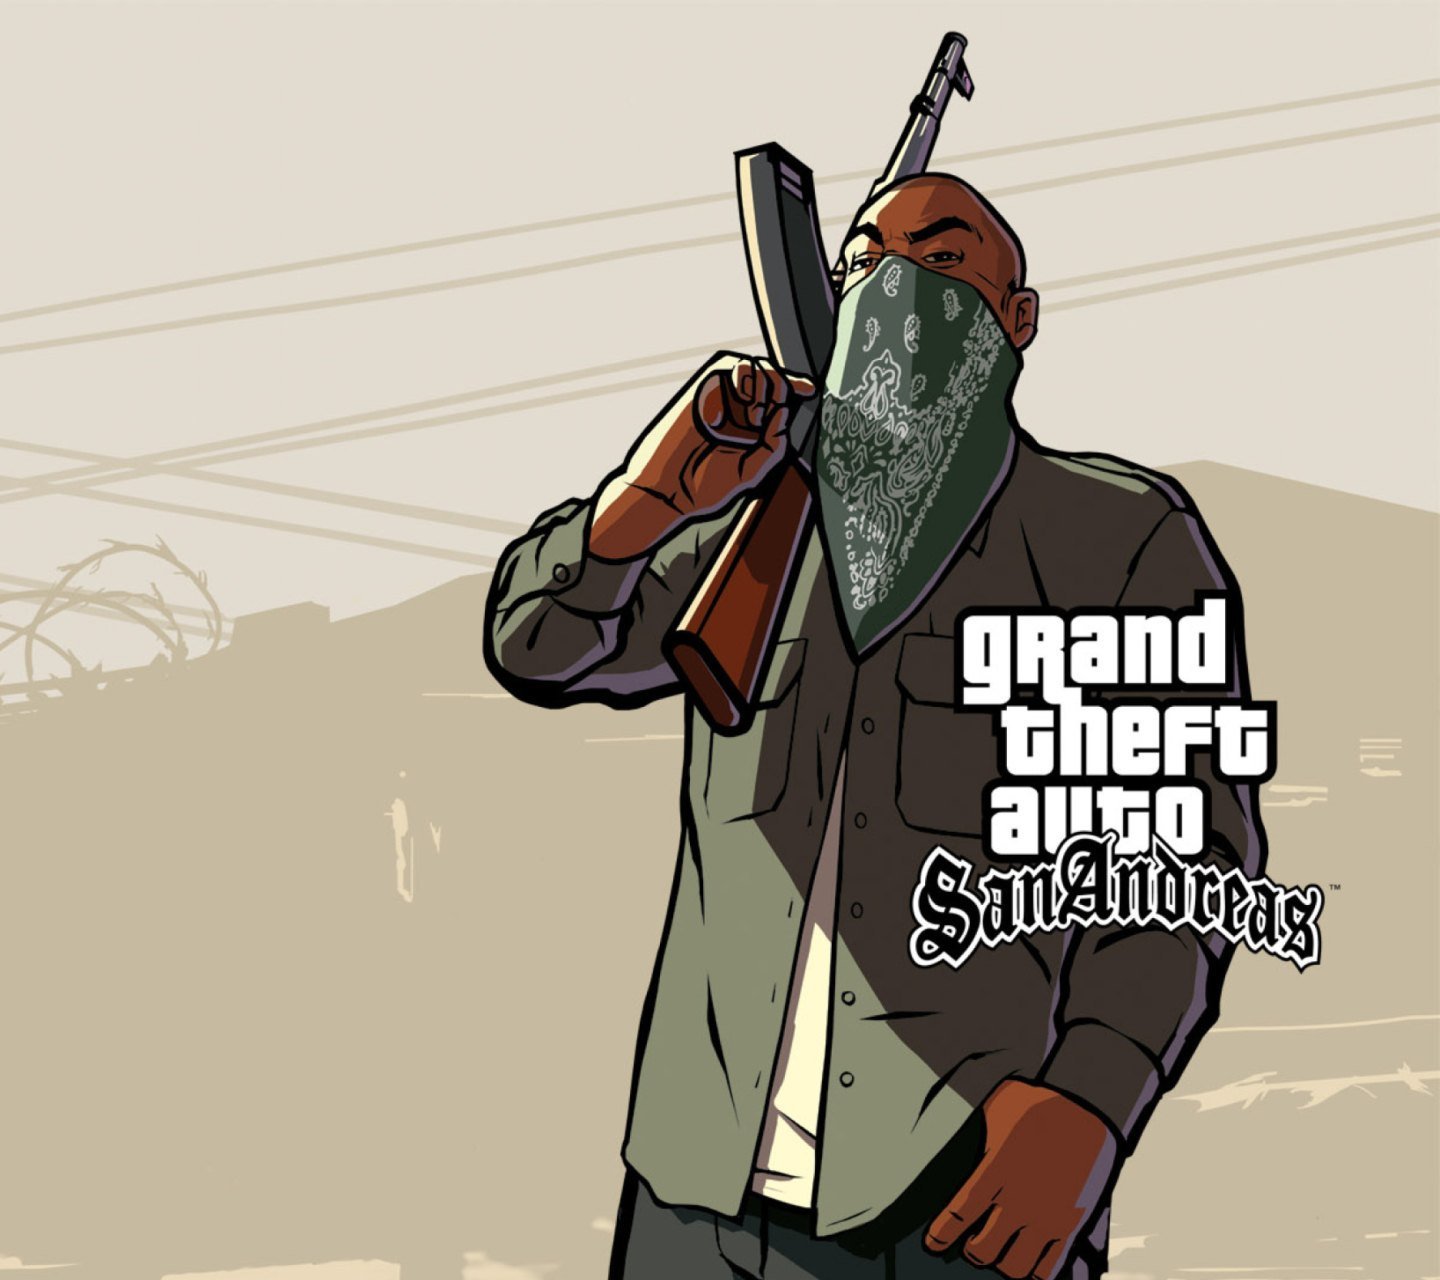 San andreas on steam фото 85